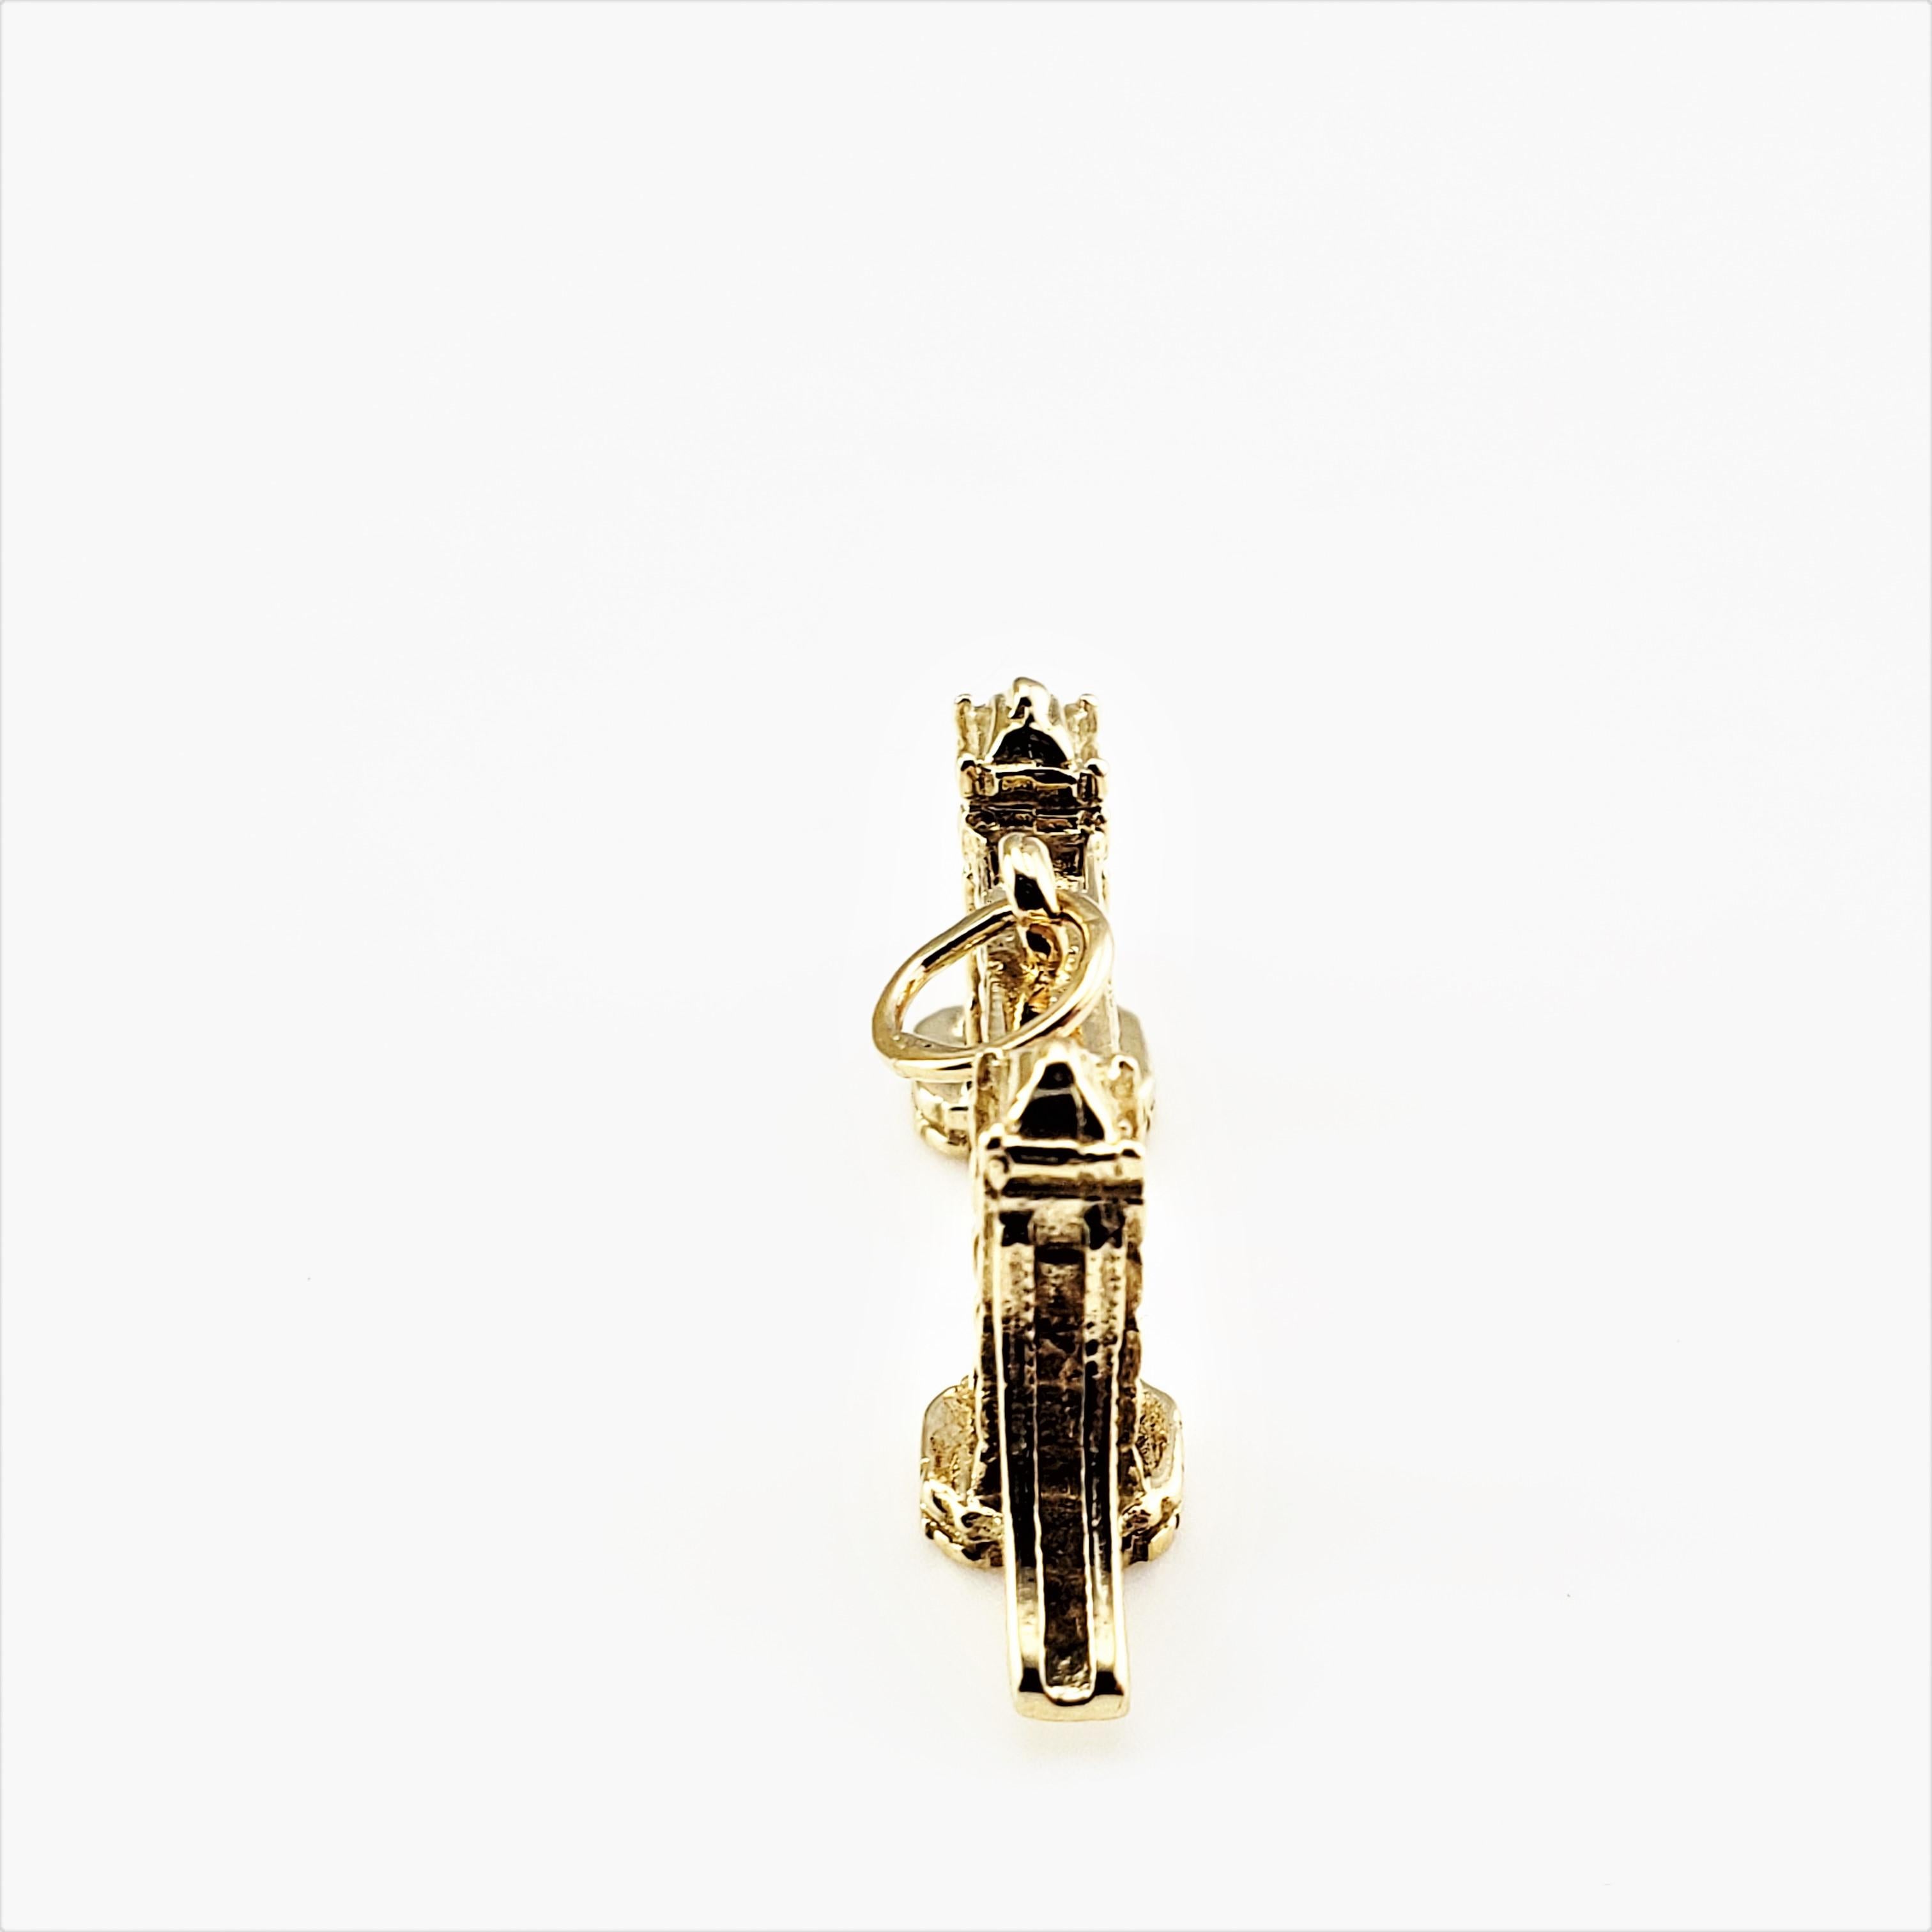 9 Karat Yellow Gold London Bridge Charm-

Perfect addition to your travel charm collection!

This lovely 3D charm features the iconic London Bridge meticulously detailed in 9K yellow gold.

*Chain not included

Size:  13 mm x  30 mm (actual